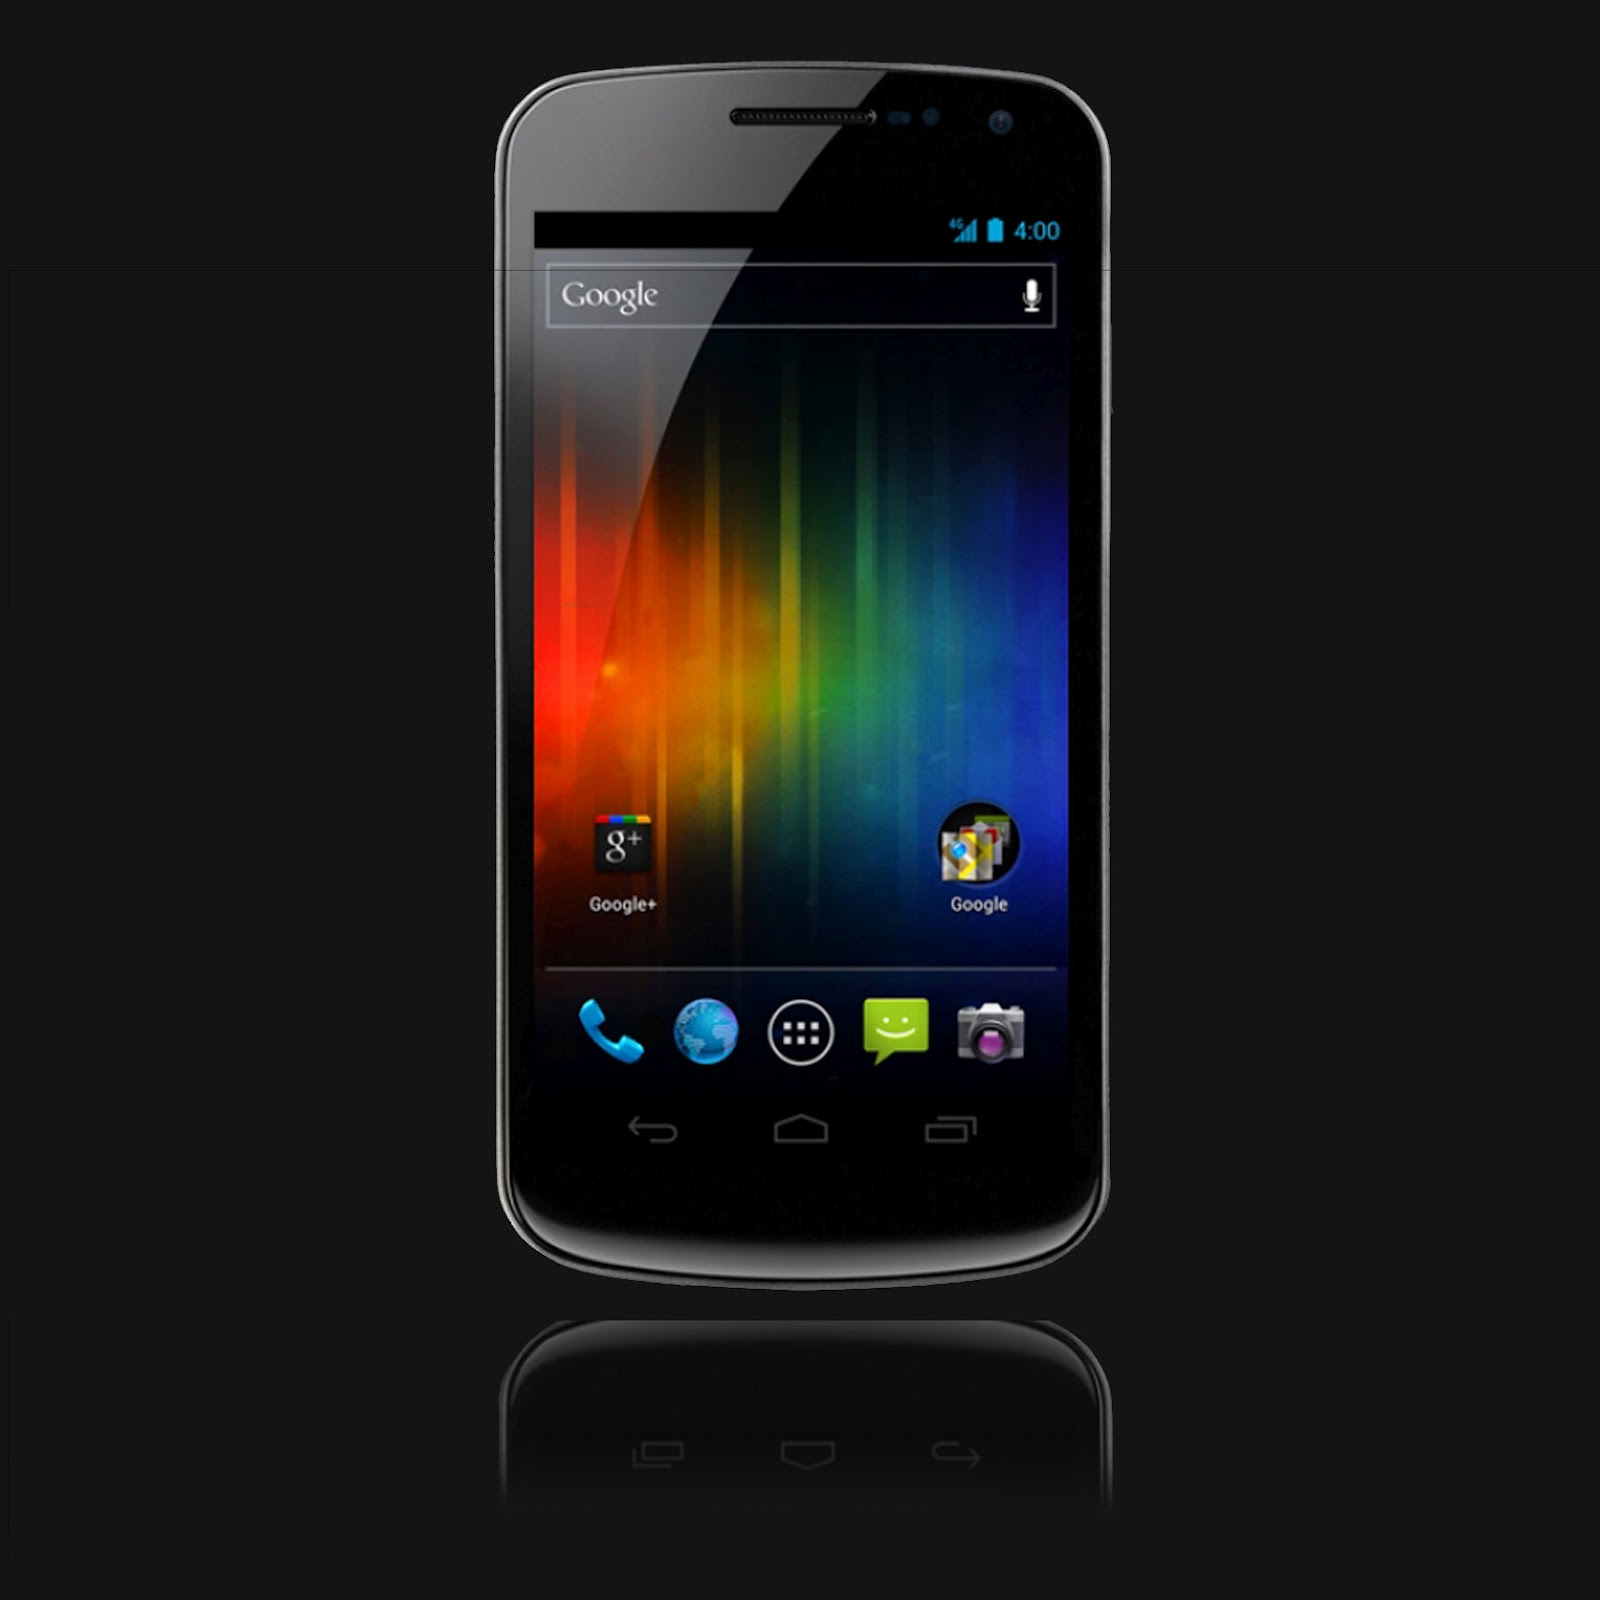 Samsung Galaxy Nexus Photo Picture Image And Wallpaper